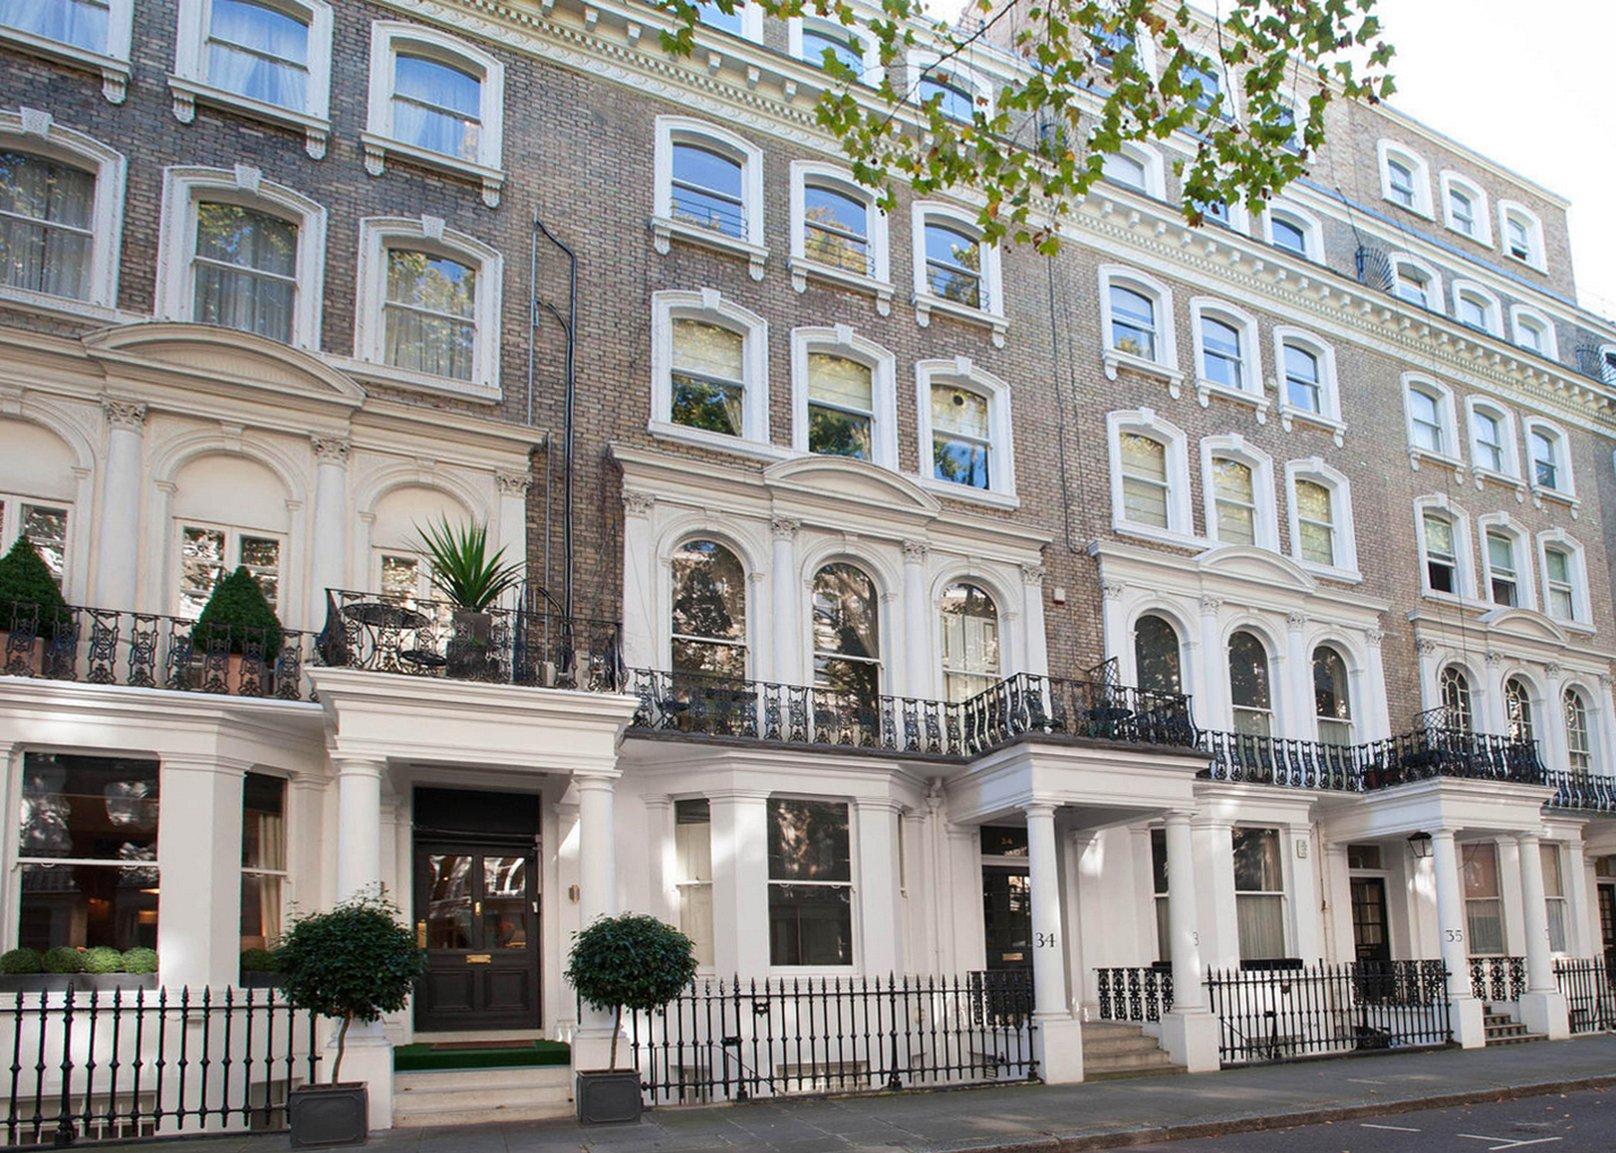 The Beaufort Hotel in London, GB1